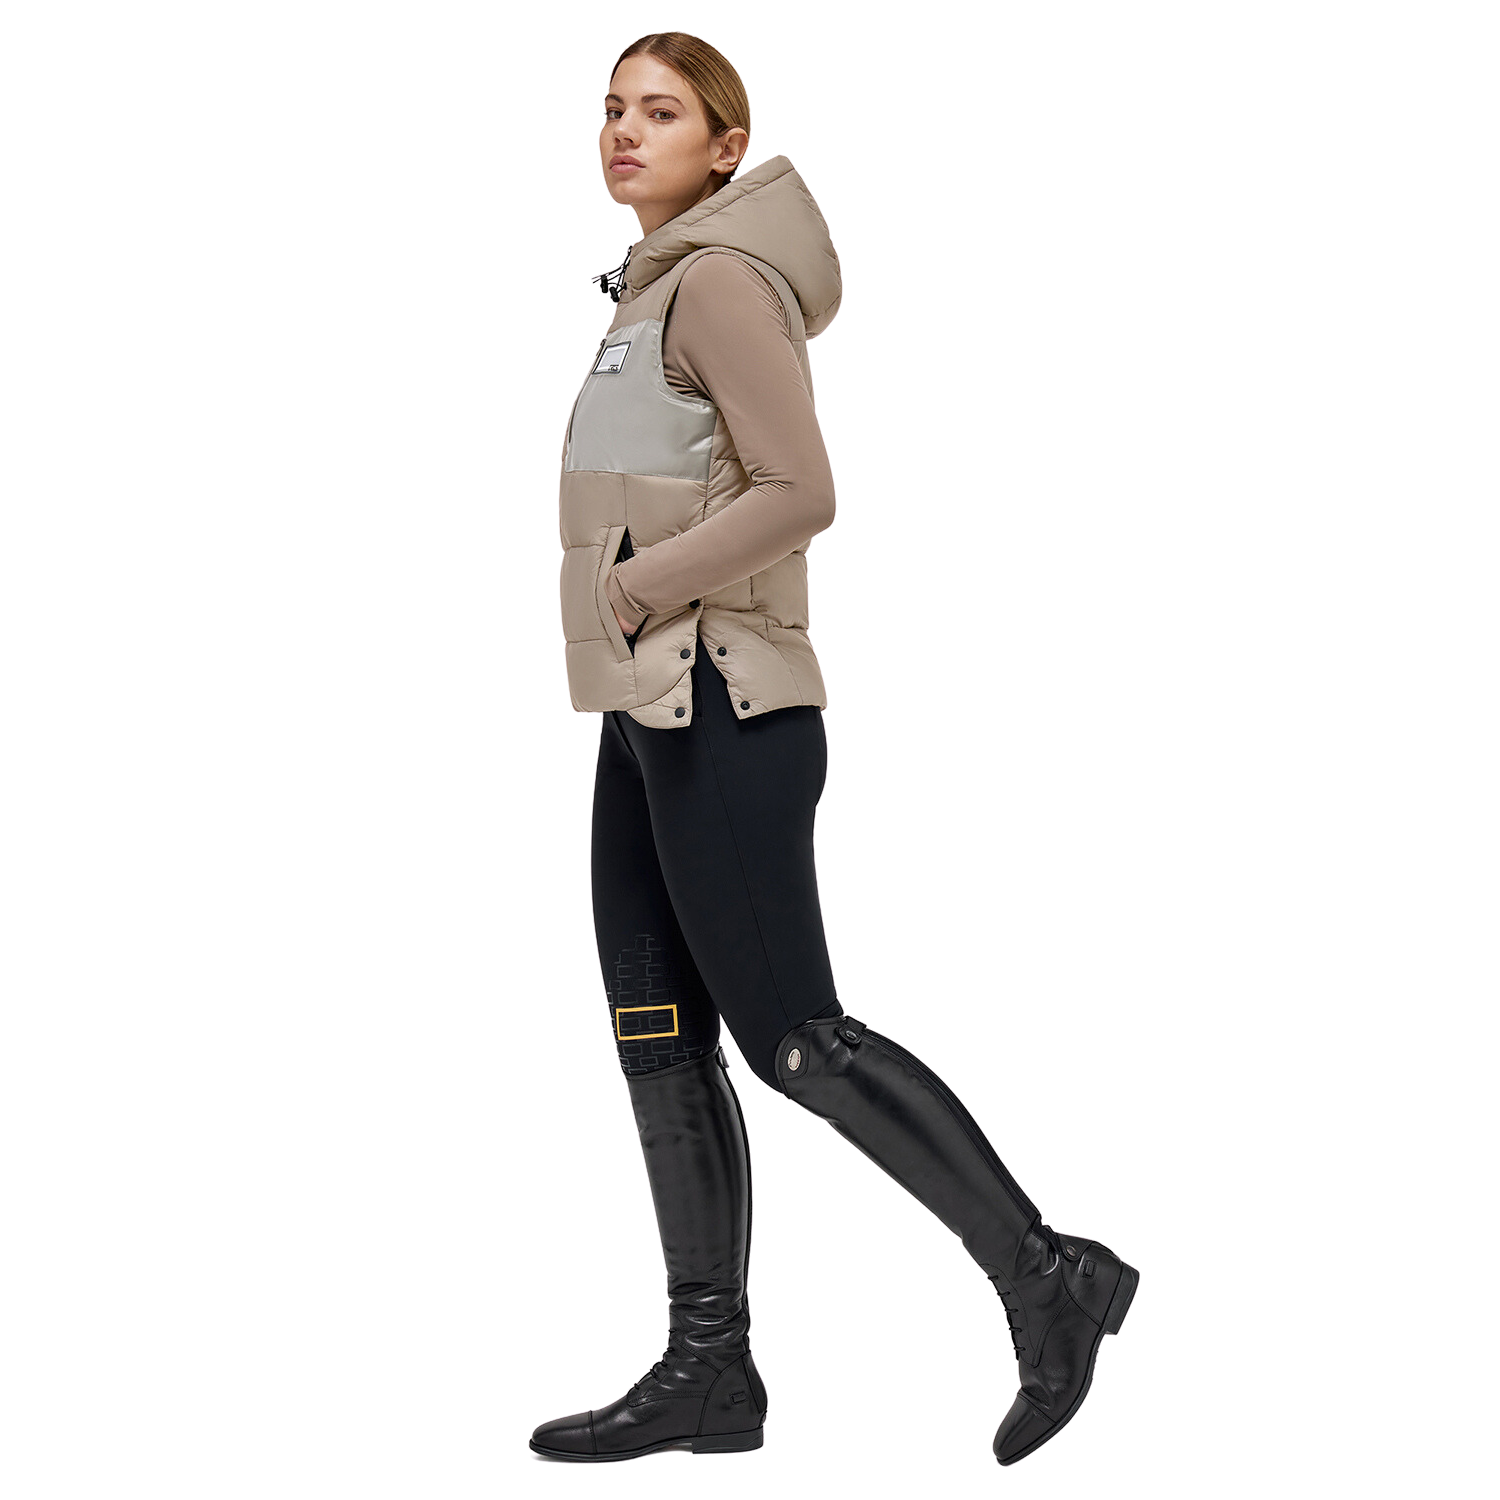 Ladies RG Quilted Hooded Puffer Vest - Sand